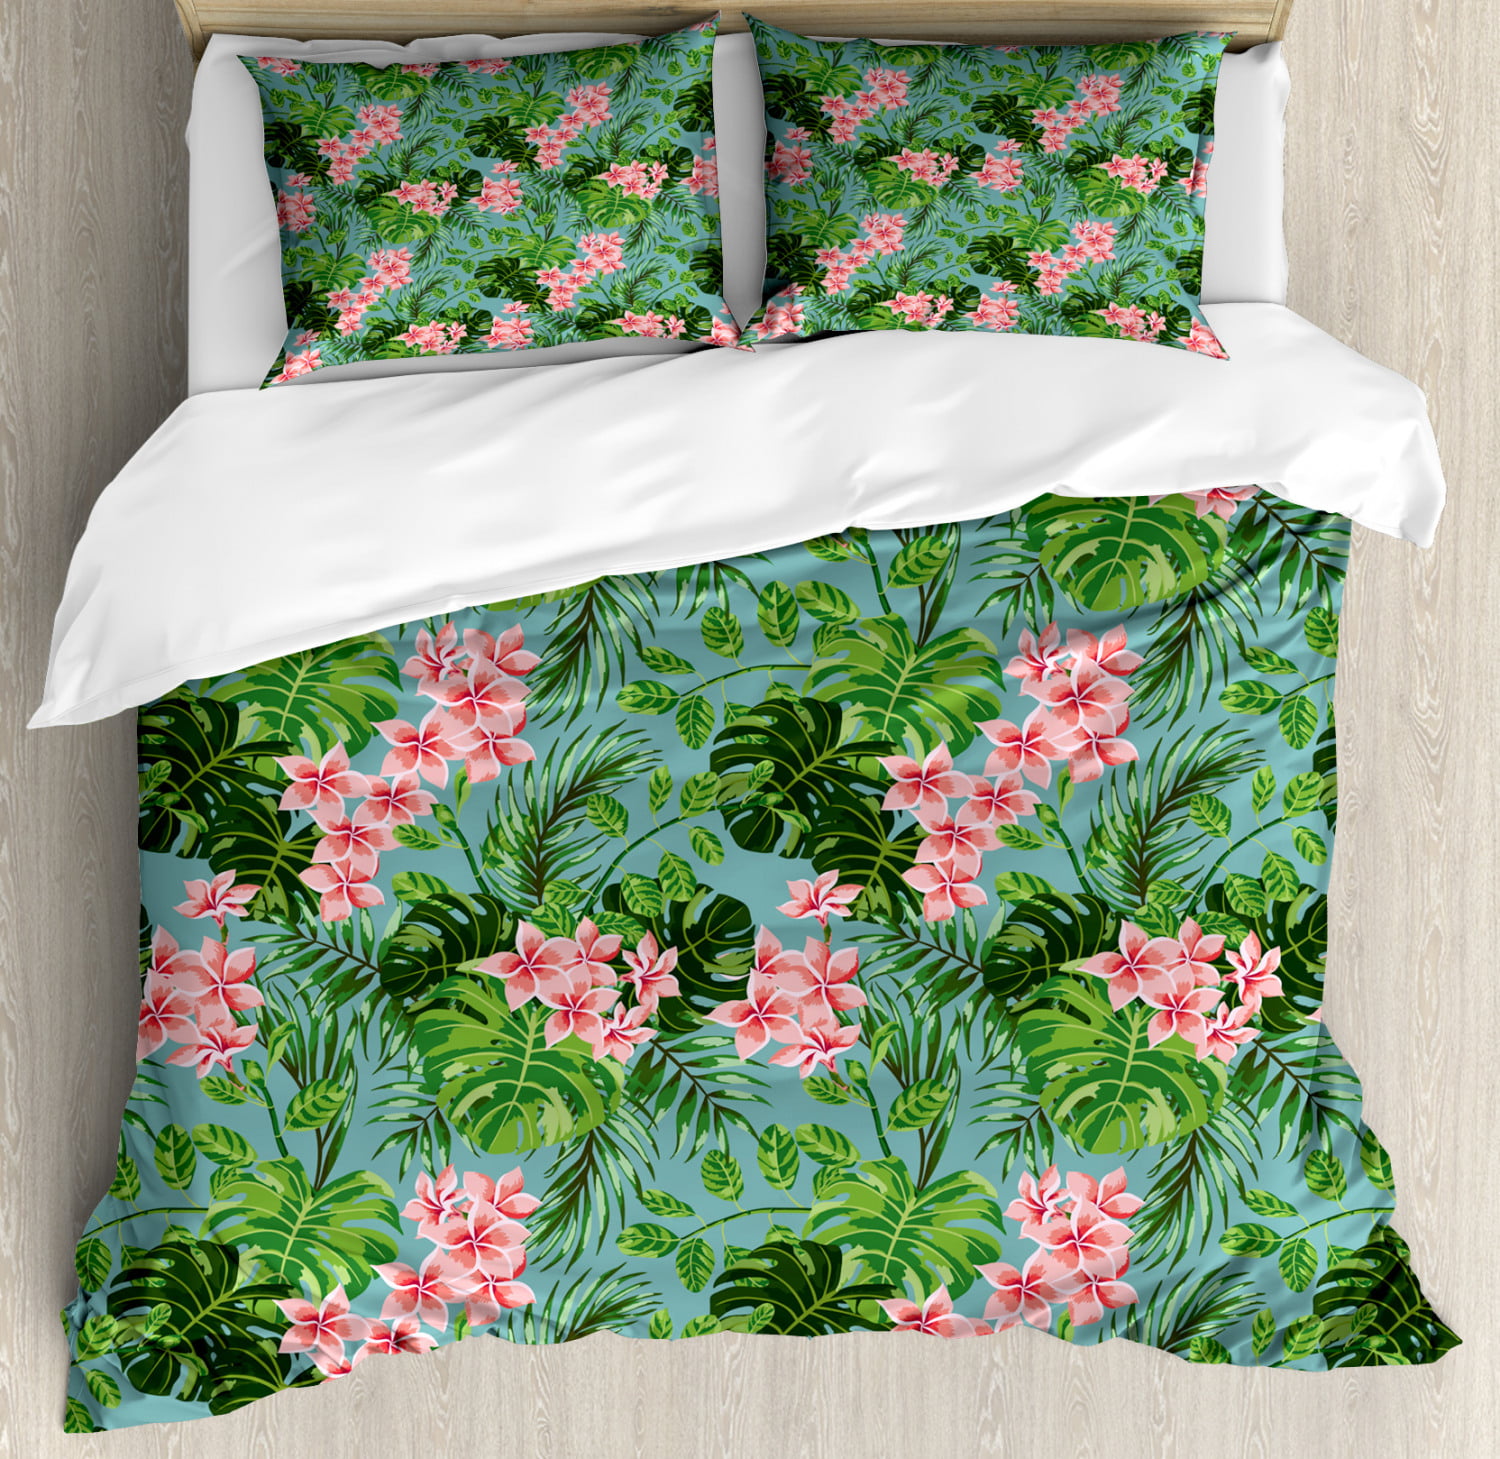 Luau Duvet Cover Set, Exotic Illustration of Leaves and Pastel Tone ...